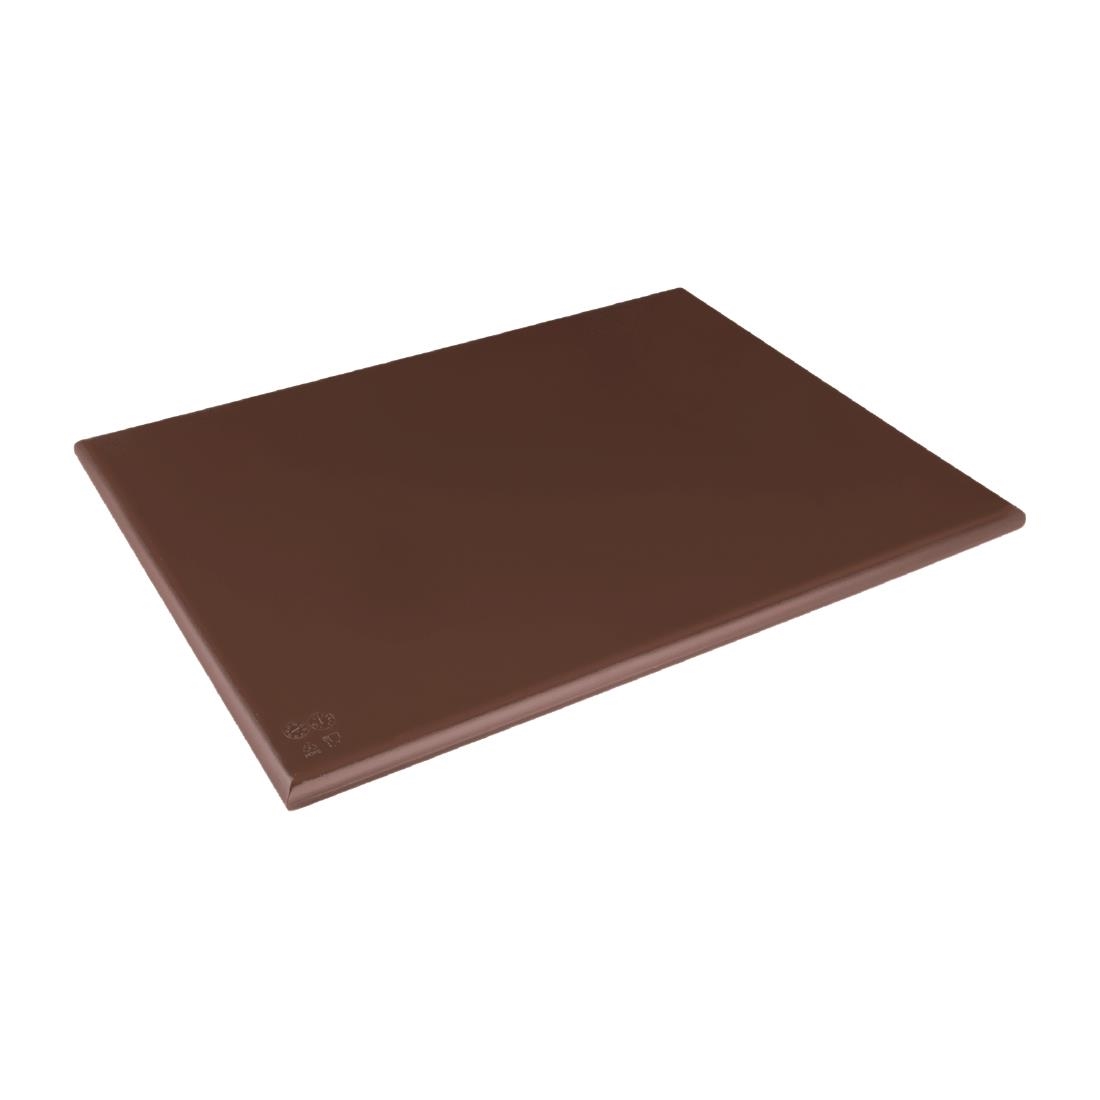 Hygiplas Extra Thick Low Density Chopping Board Large 